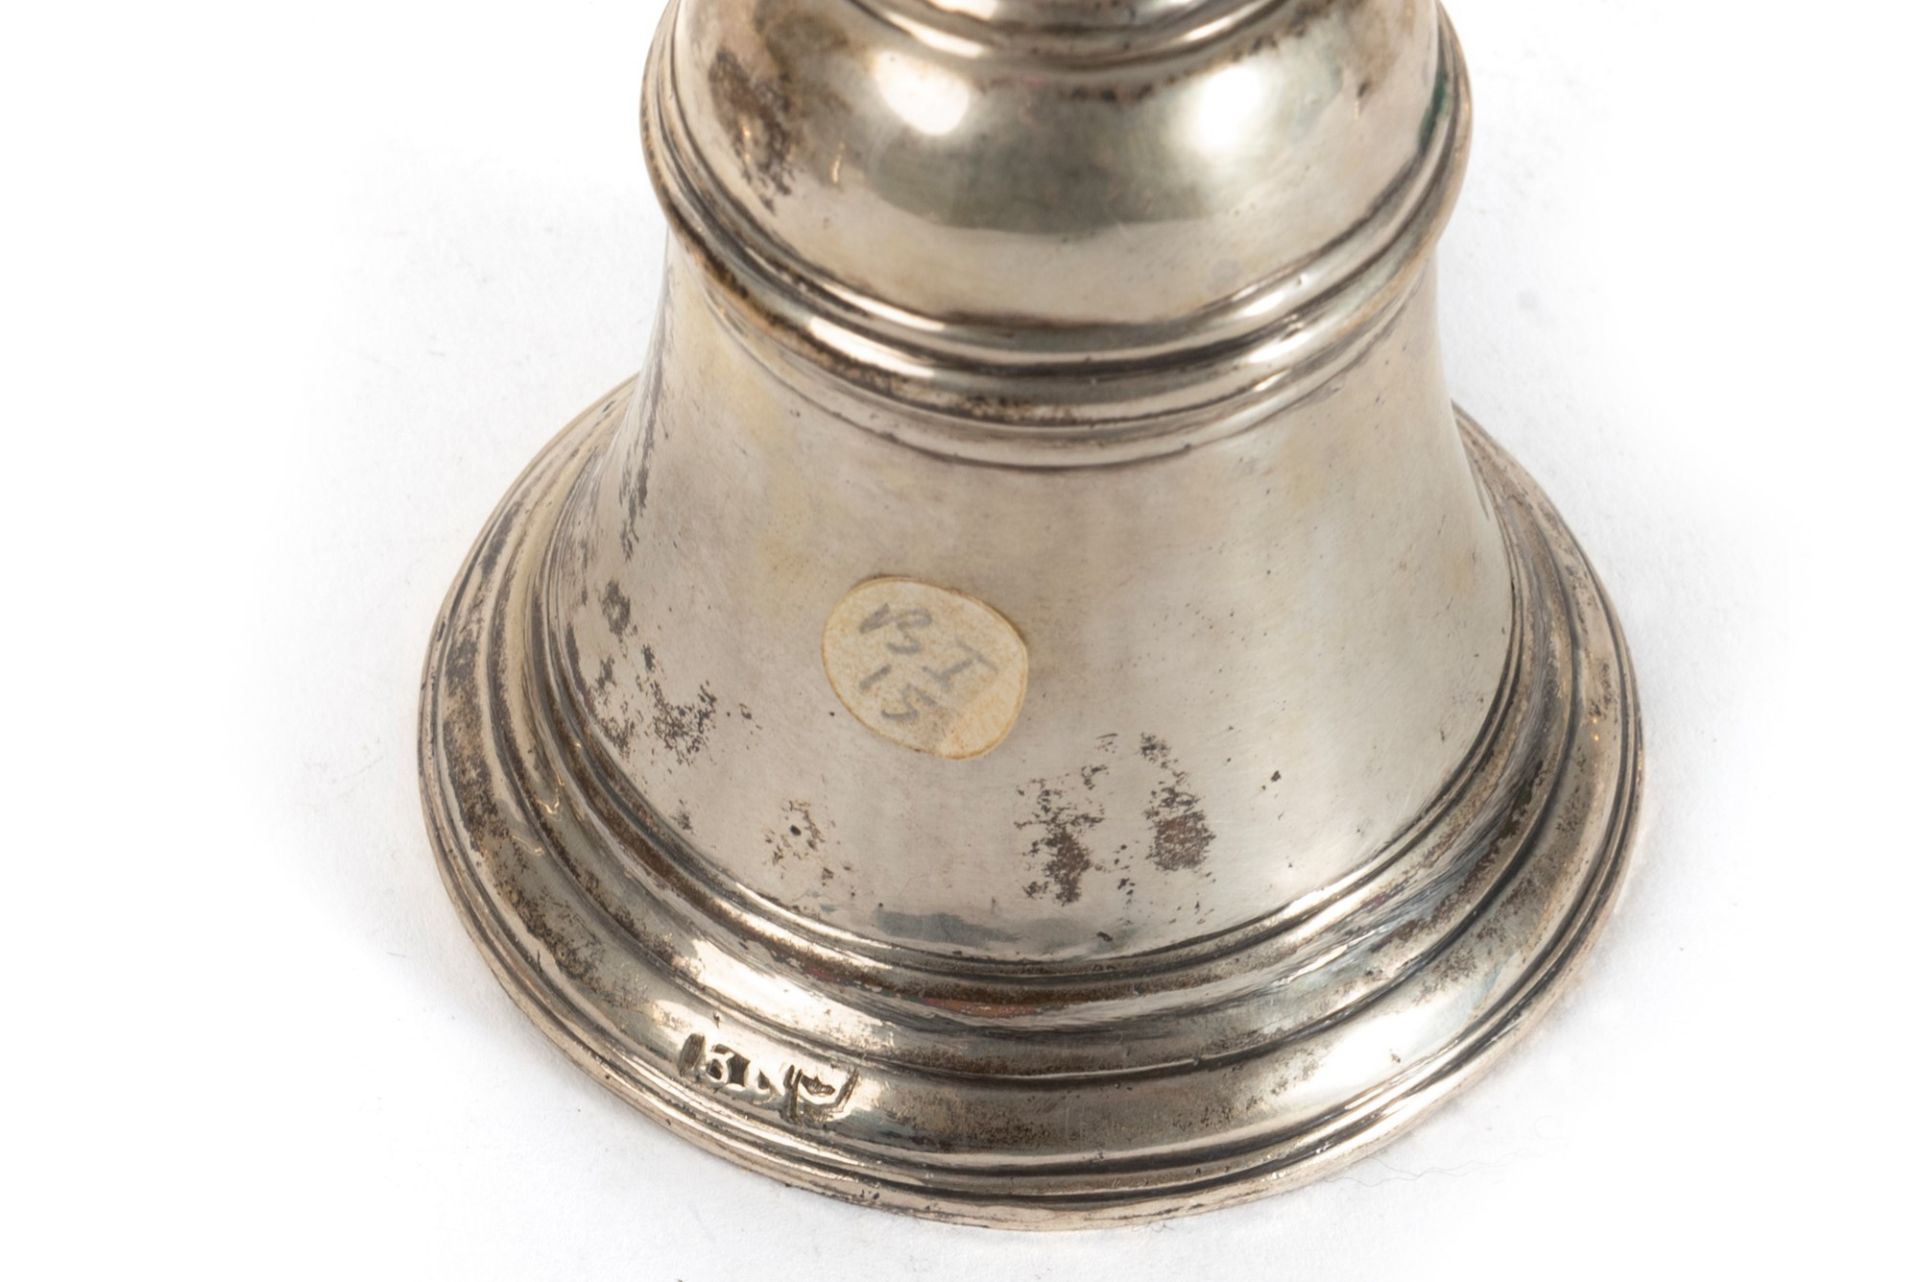 Lot consisting of twelve silver bells, late 19th century - early 20th century - Image 2 of 3